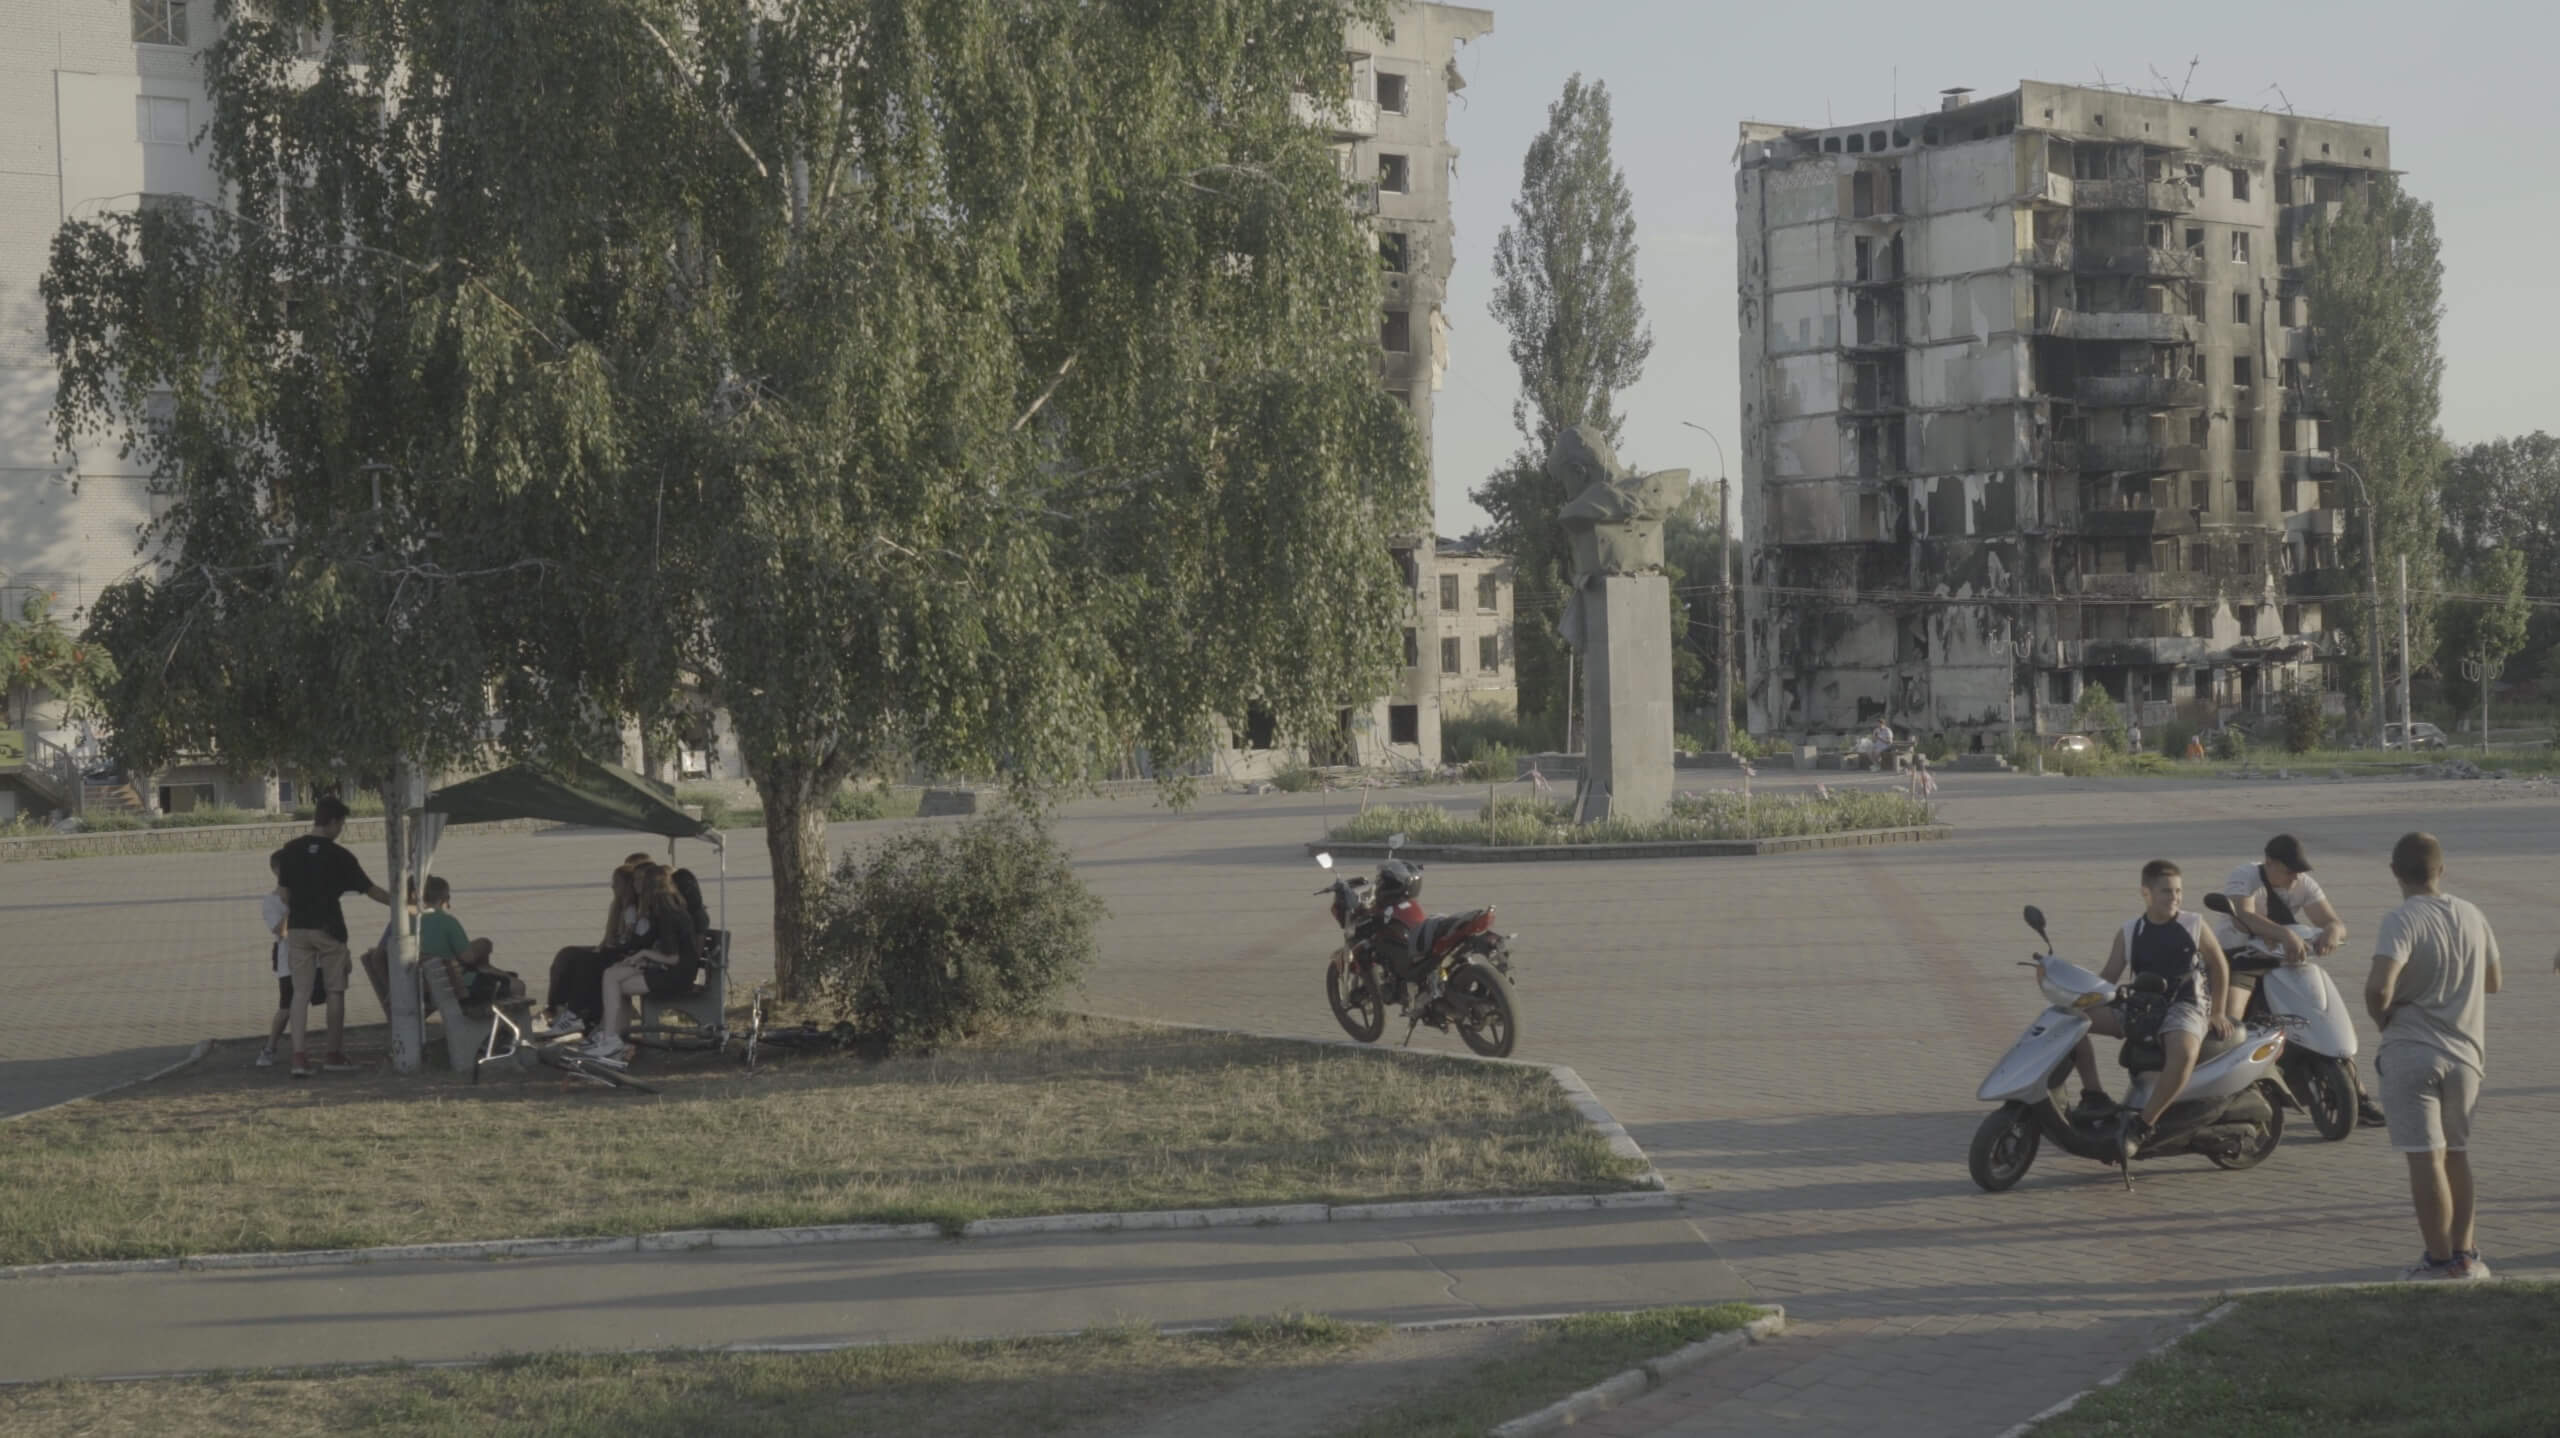 Production still of Intercepted. Two groups of people are gathering in a plaza. To the left, one group is sitting on benches underneath a large tree. A group of men to the right are standing near their motorbikes. Centered in the frame is a parked motorcycle. In the background are a damaged statue and a bombed out apartment building.